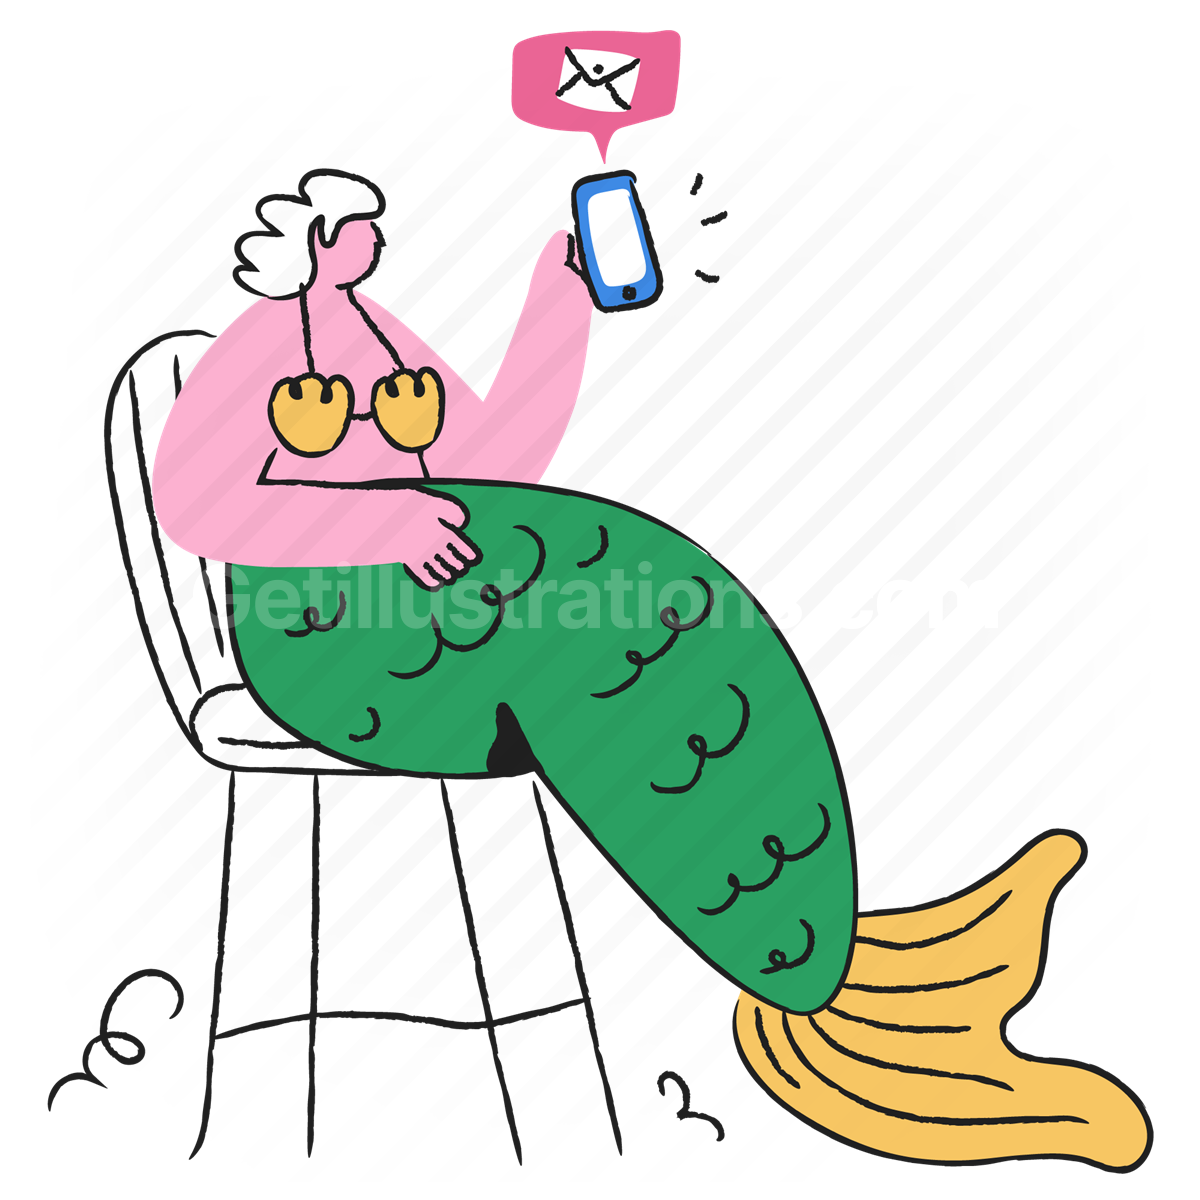 woman, mermaid, fish, message, notification, email, smartphone, mobile, chair